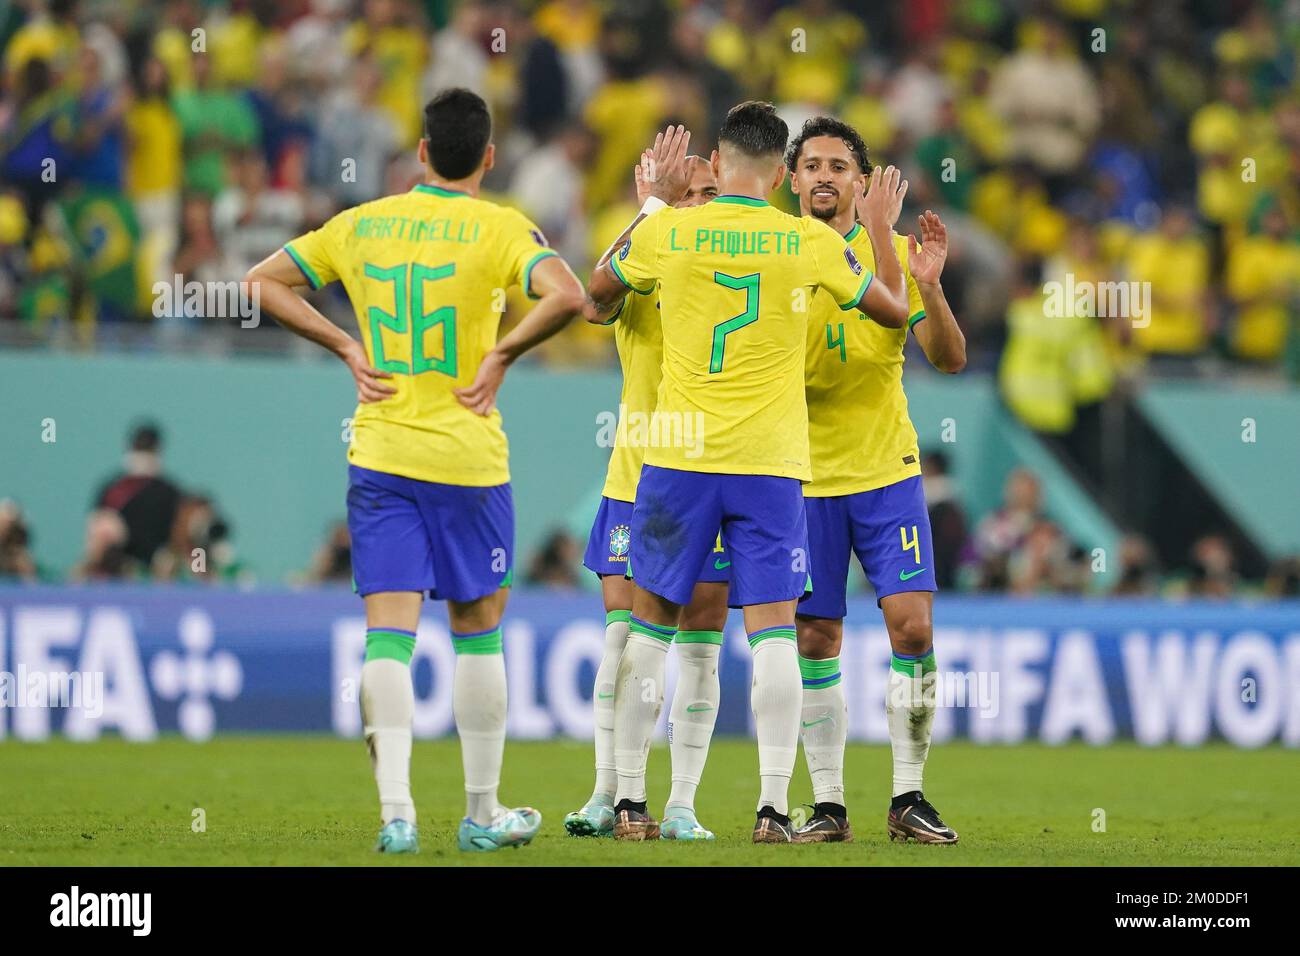 Doha, Qatar. 05th Dec, 2022. Stadium 974 DOHA, QATAR - DECEMBER 5: Players of Brazil Gabriel Martinelli, Lucas Paquetá, Dani Alves and Marquinhos celebrate the victory after the FIFA World Cup Qatar 2022 Round of 16 match between Brazil and South Korea at Stadium 974 on December 5, 2022 in Doha, Qatar. (Photo by Florencia Tan Jun/PxImages) (Florencia Tan Jun/SPP) Credit: SPP Sport Press Photo. /Alamy Live News Stock Photo